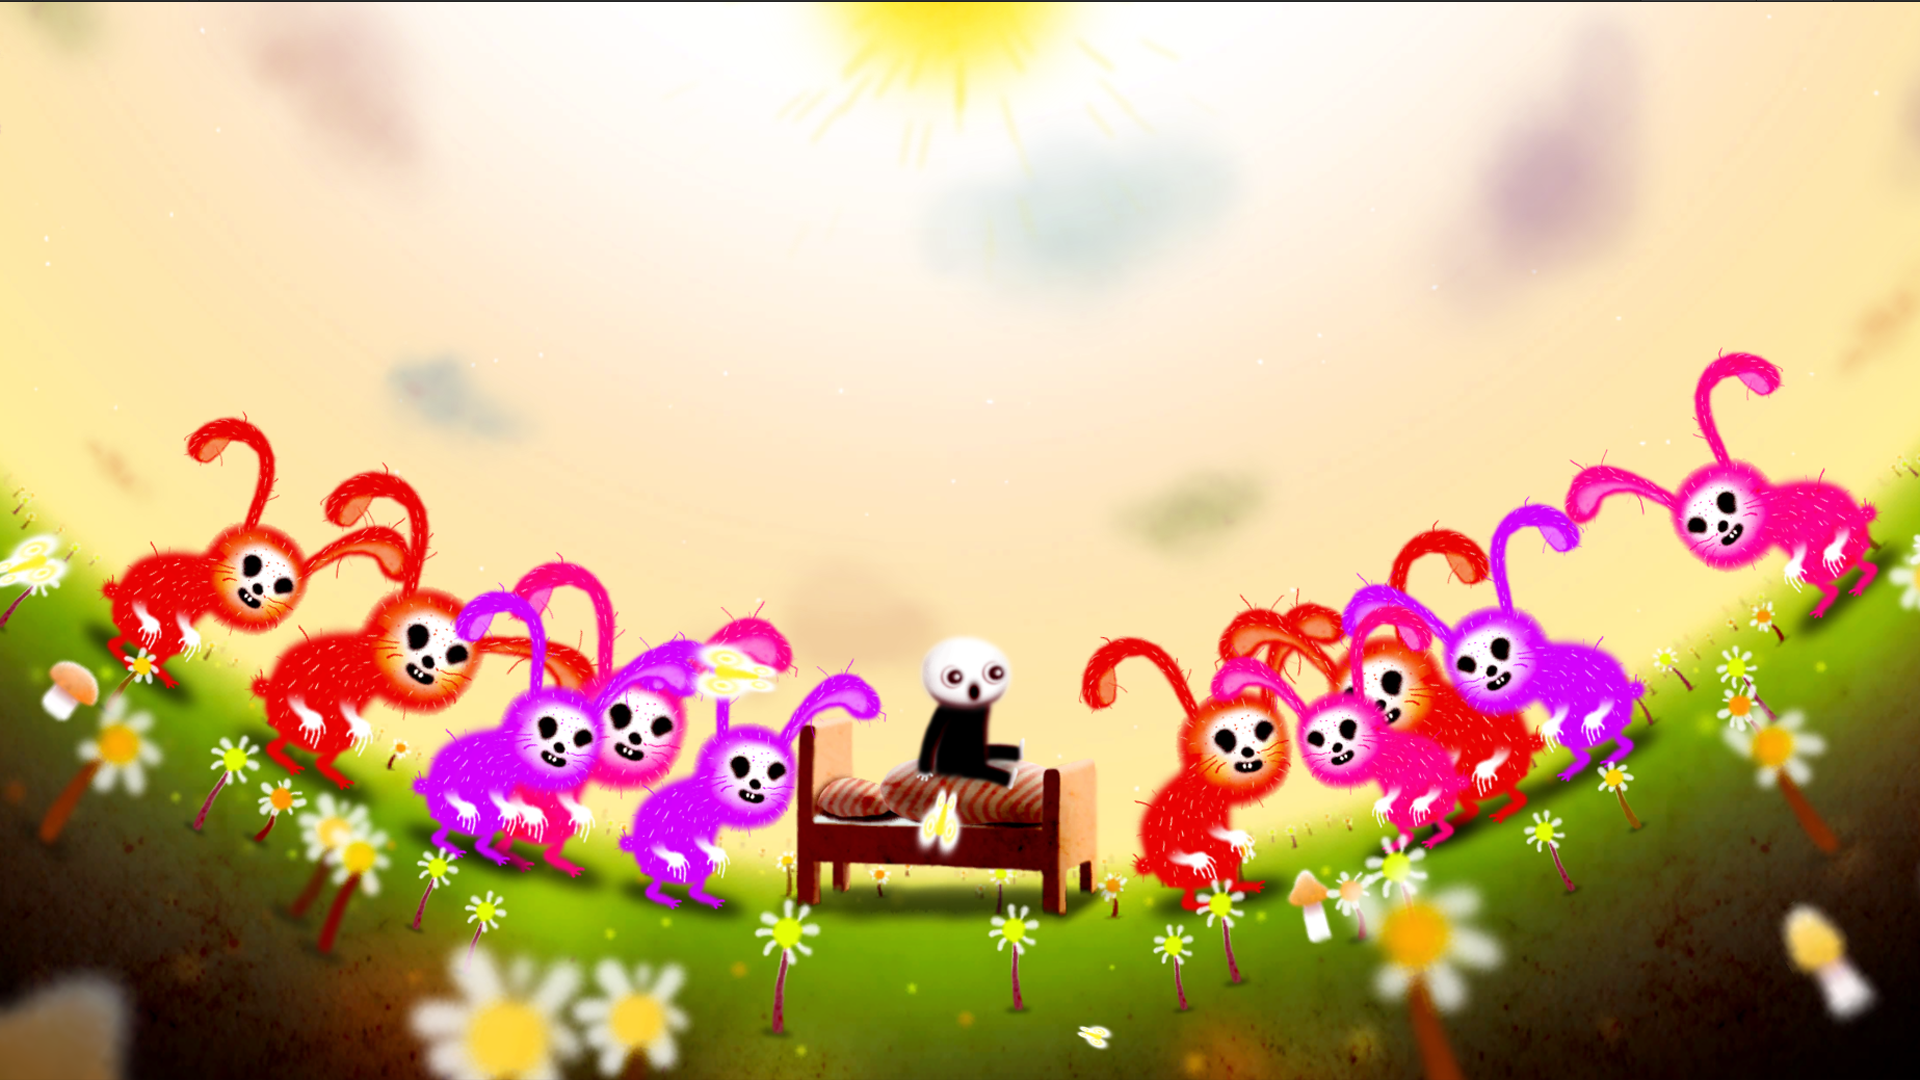 happy game download free